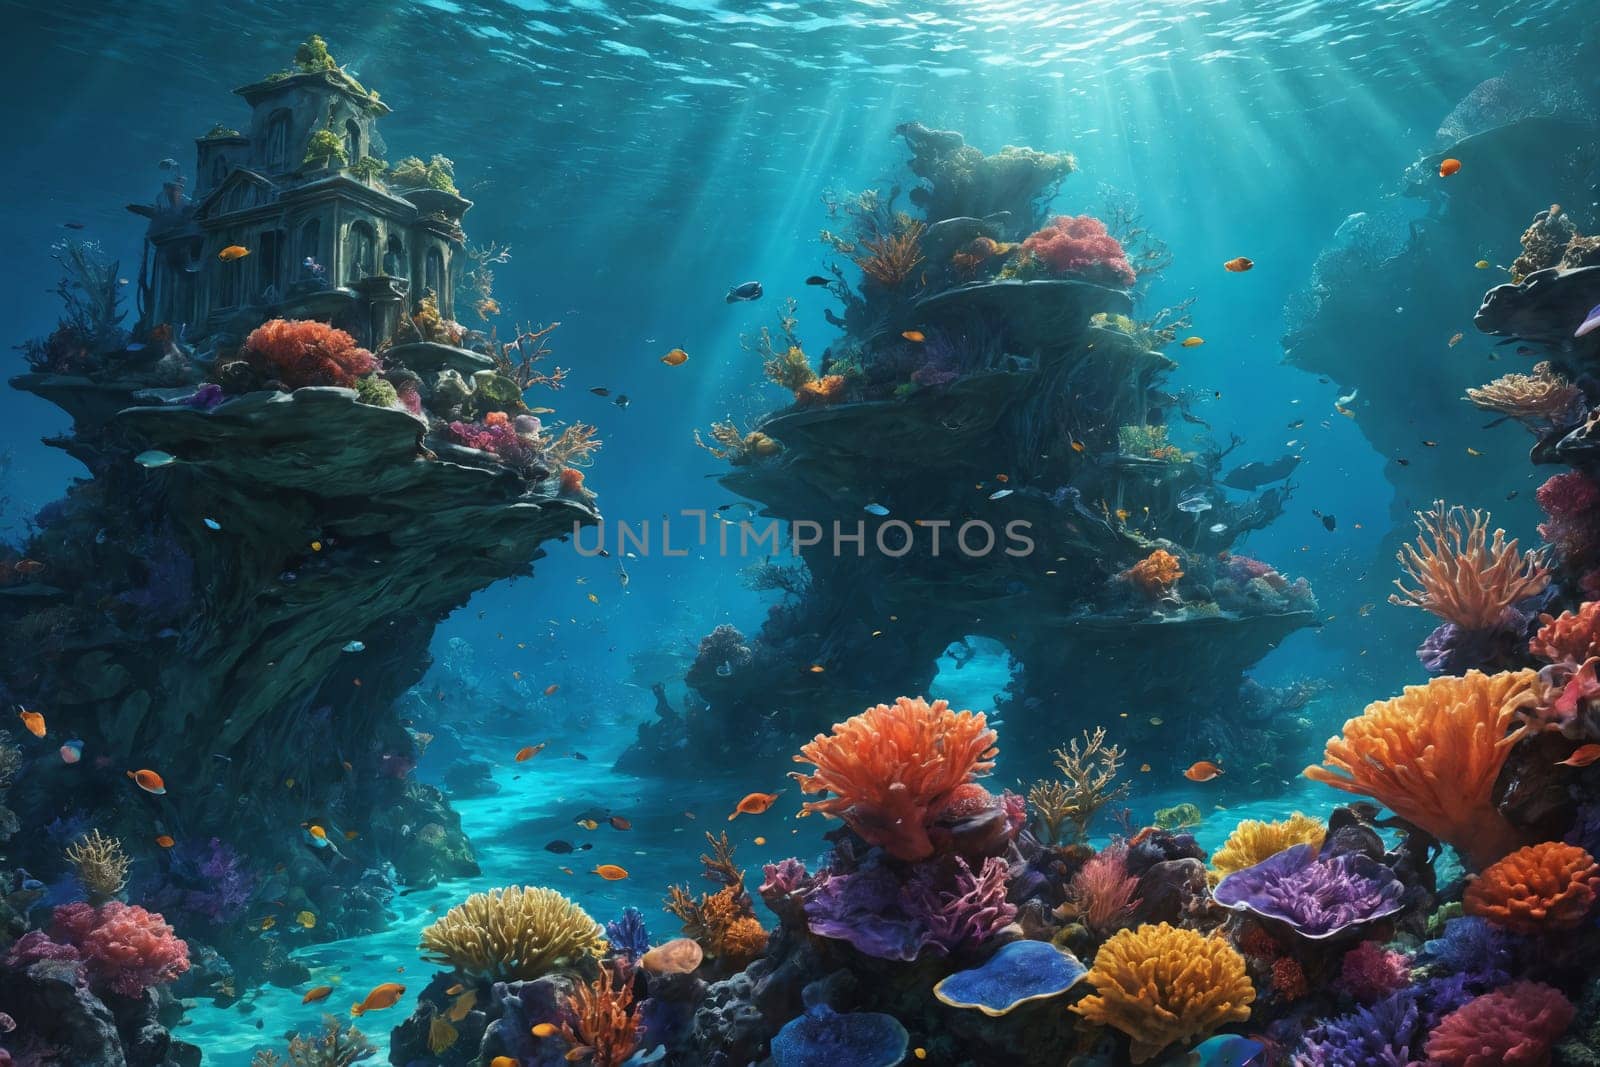 Dive into the tranquility of underwater life with this image showcasing sunlight-kissed corals and a variety of tropical fish. Ideal for marine biology or conservation themes.